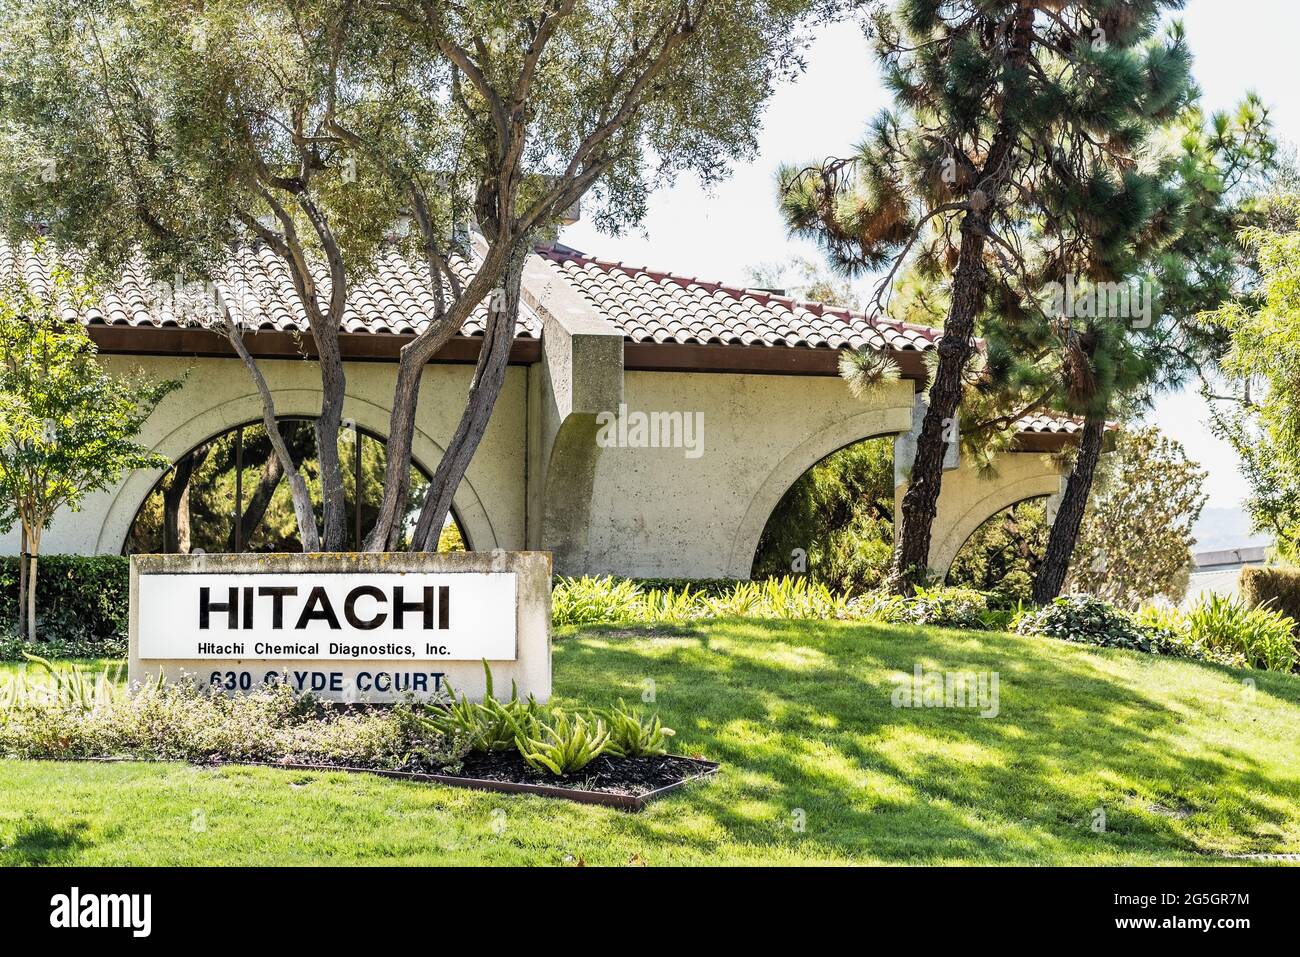 Sep 26, 2020 Mountain View / CA / USA - Hitachi Chemical Diagnostics headquarters in Silicon Valley; Hitachi, Ltd. is a Japanese multinational conglom Stock Photo